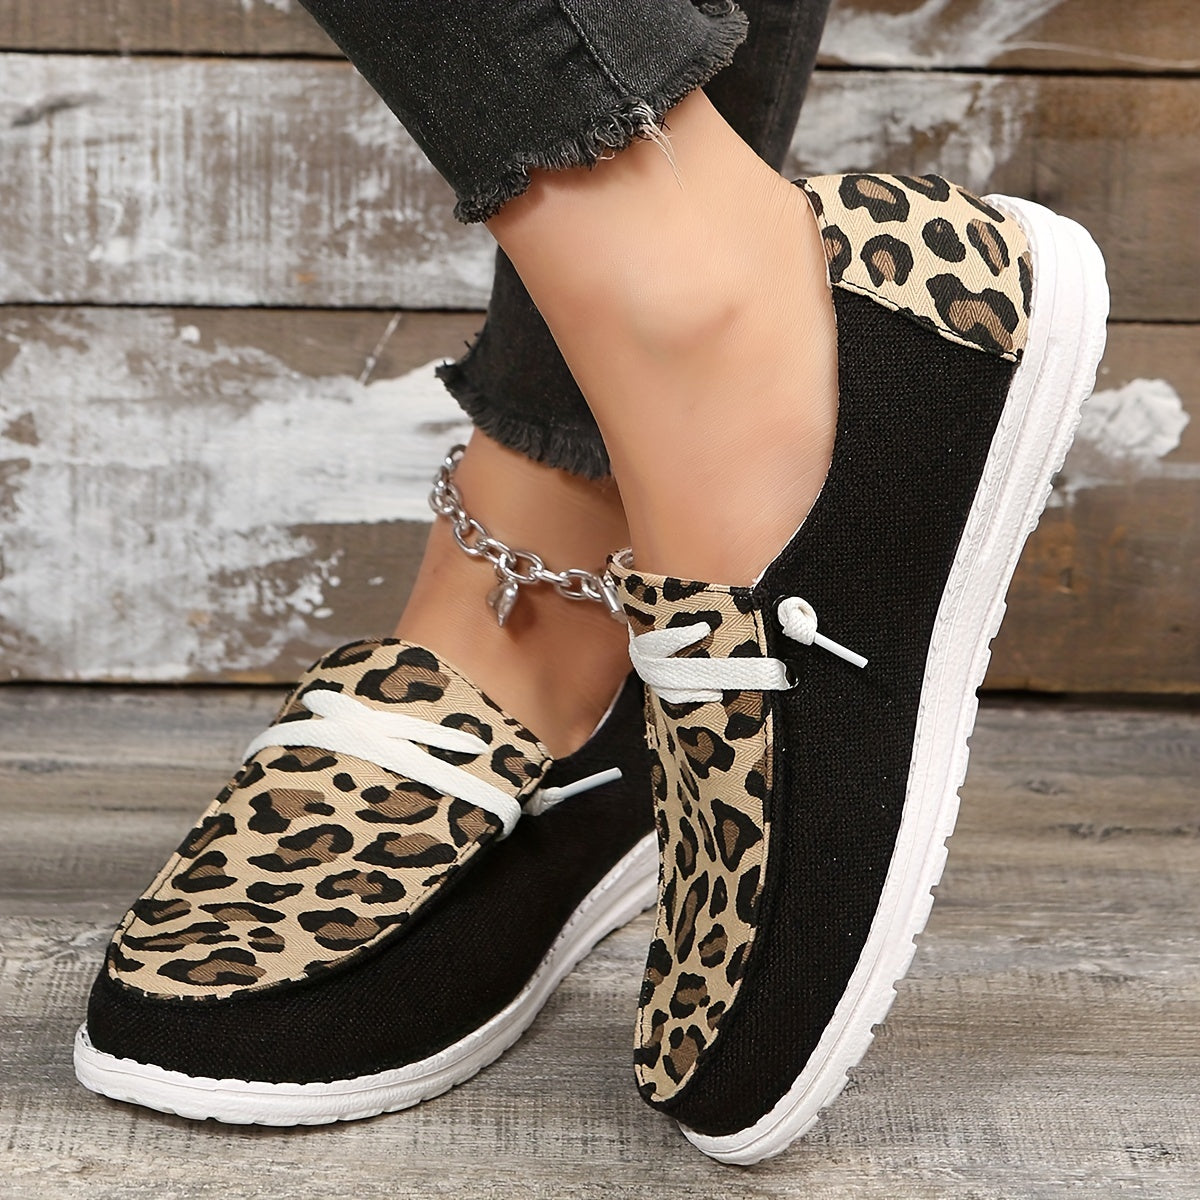 Women's Leopard Printed Canvas Shoes, Casual Round Toe Lace Up Sneakers, Versatile Low Top Flats